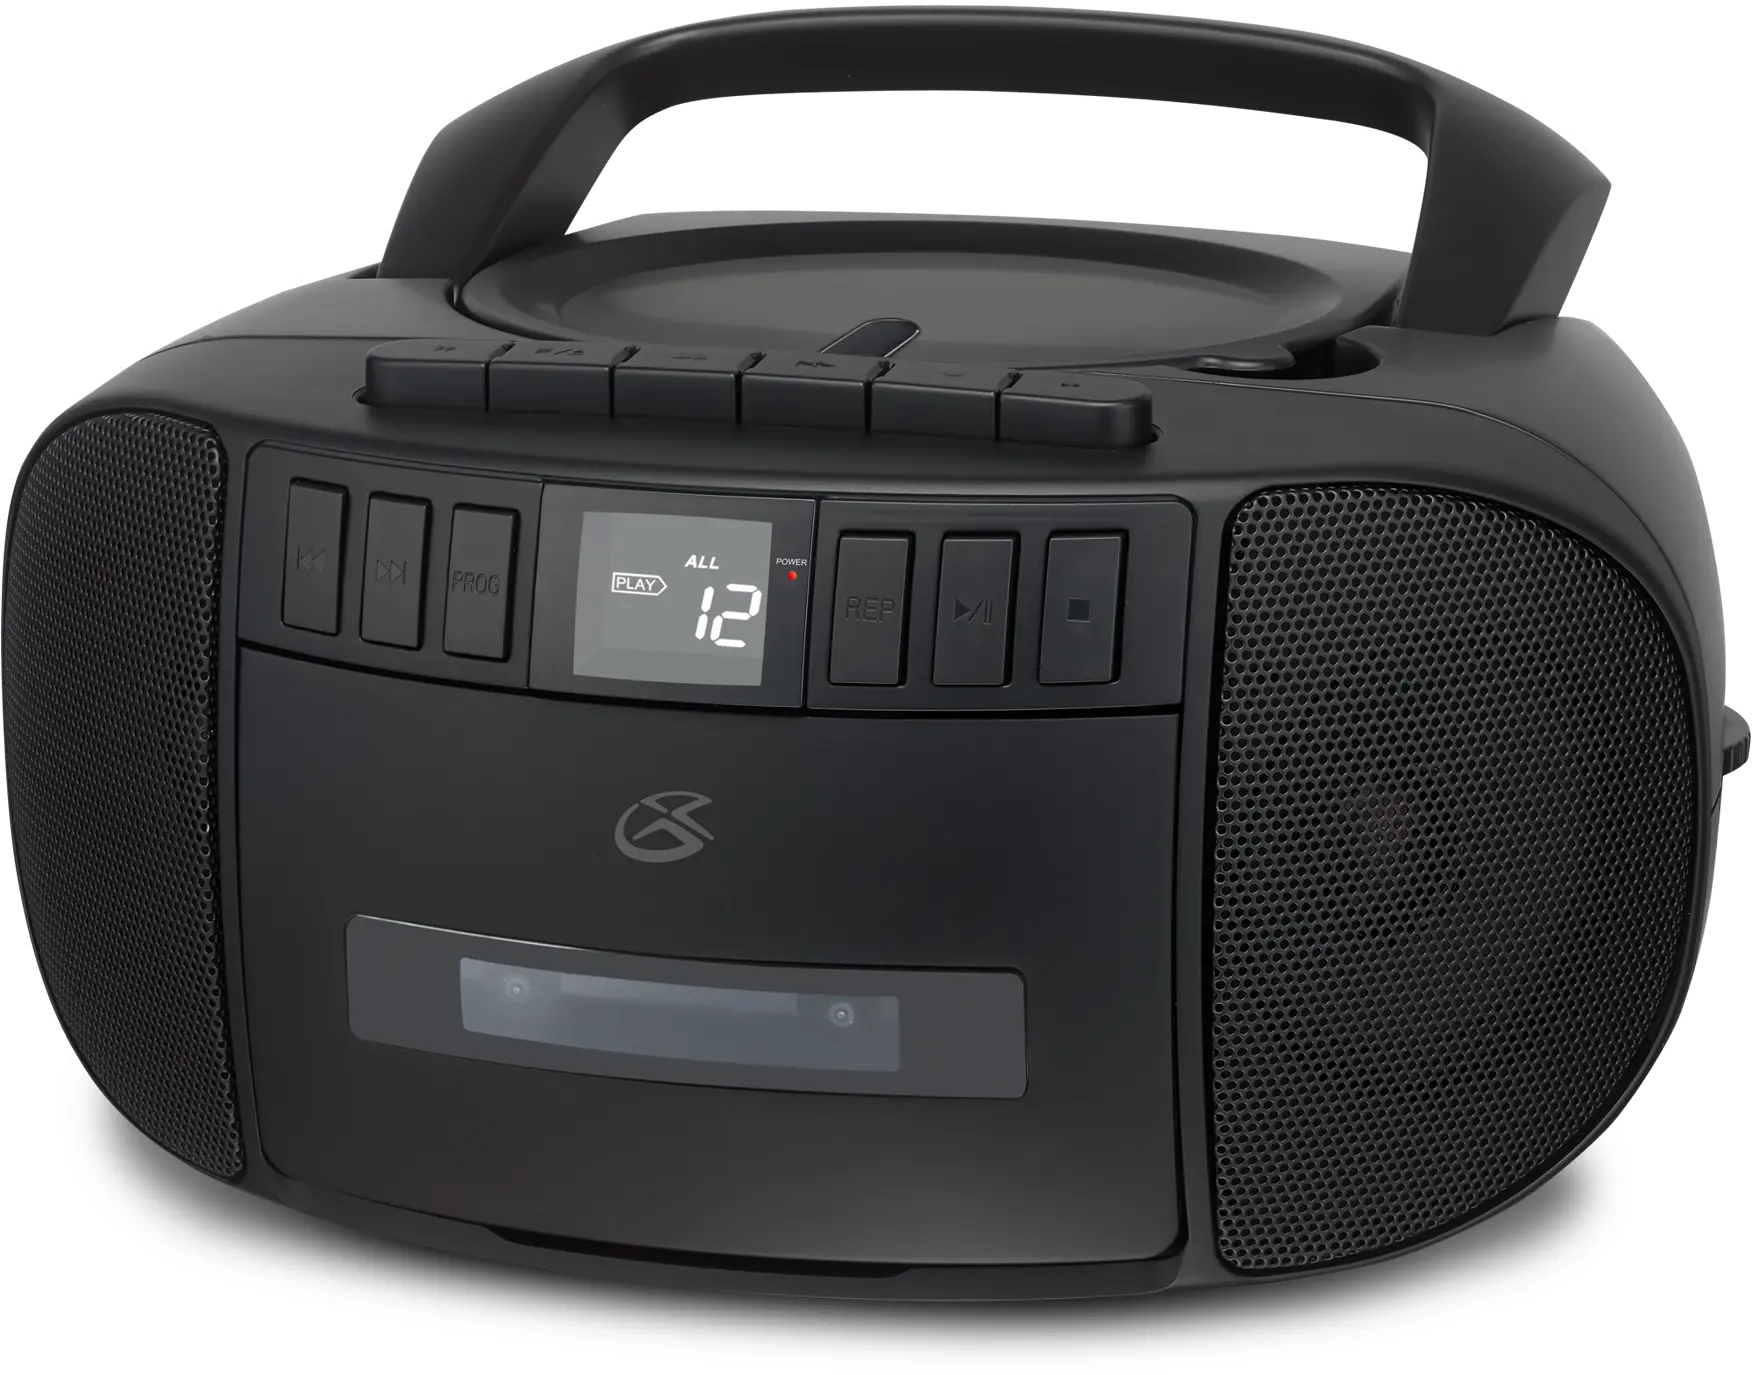 Photos - Audio System GPX GPX Boombox with CD, Cassette and AM/FM Radio - Black BCA209B